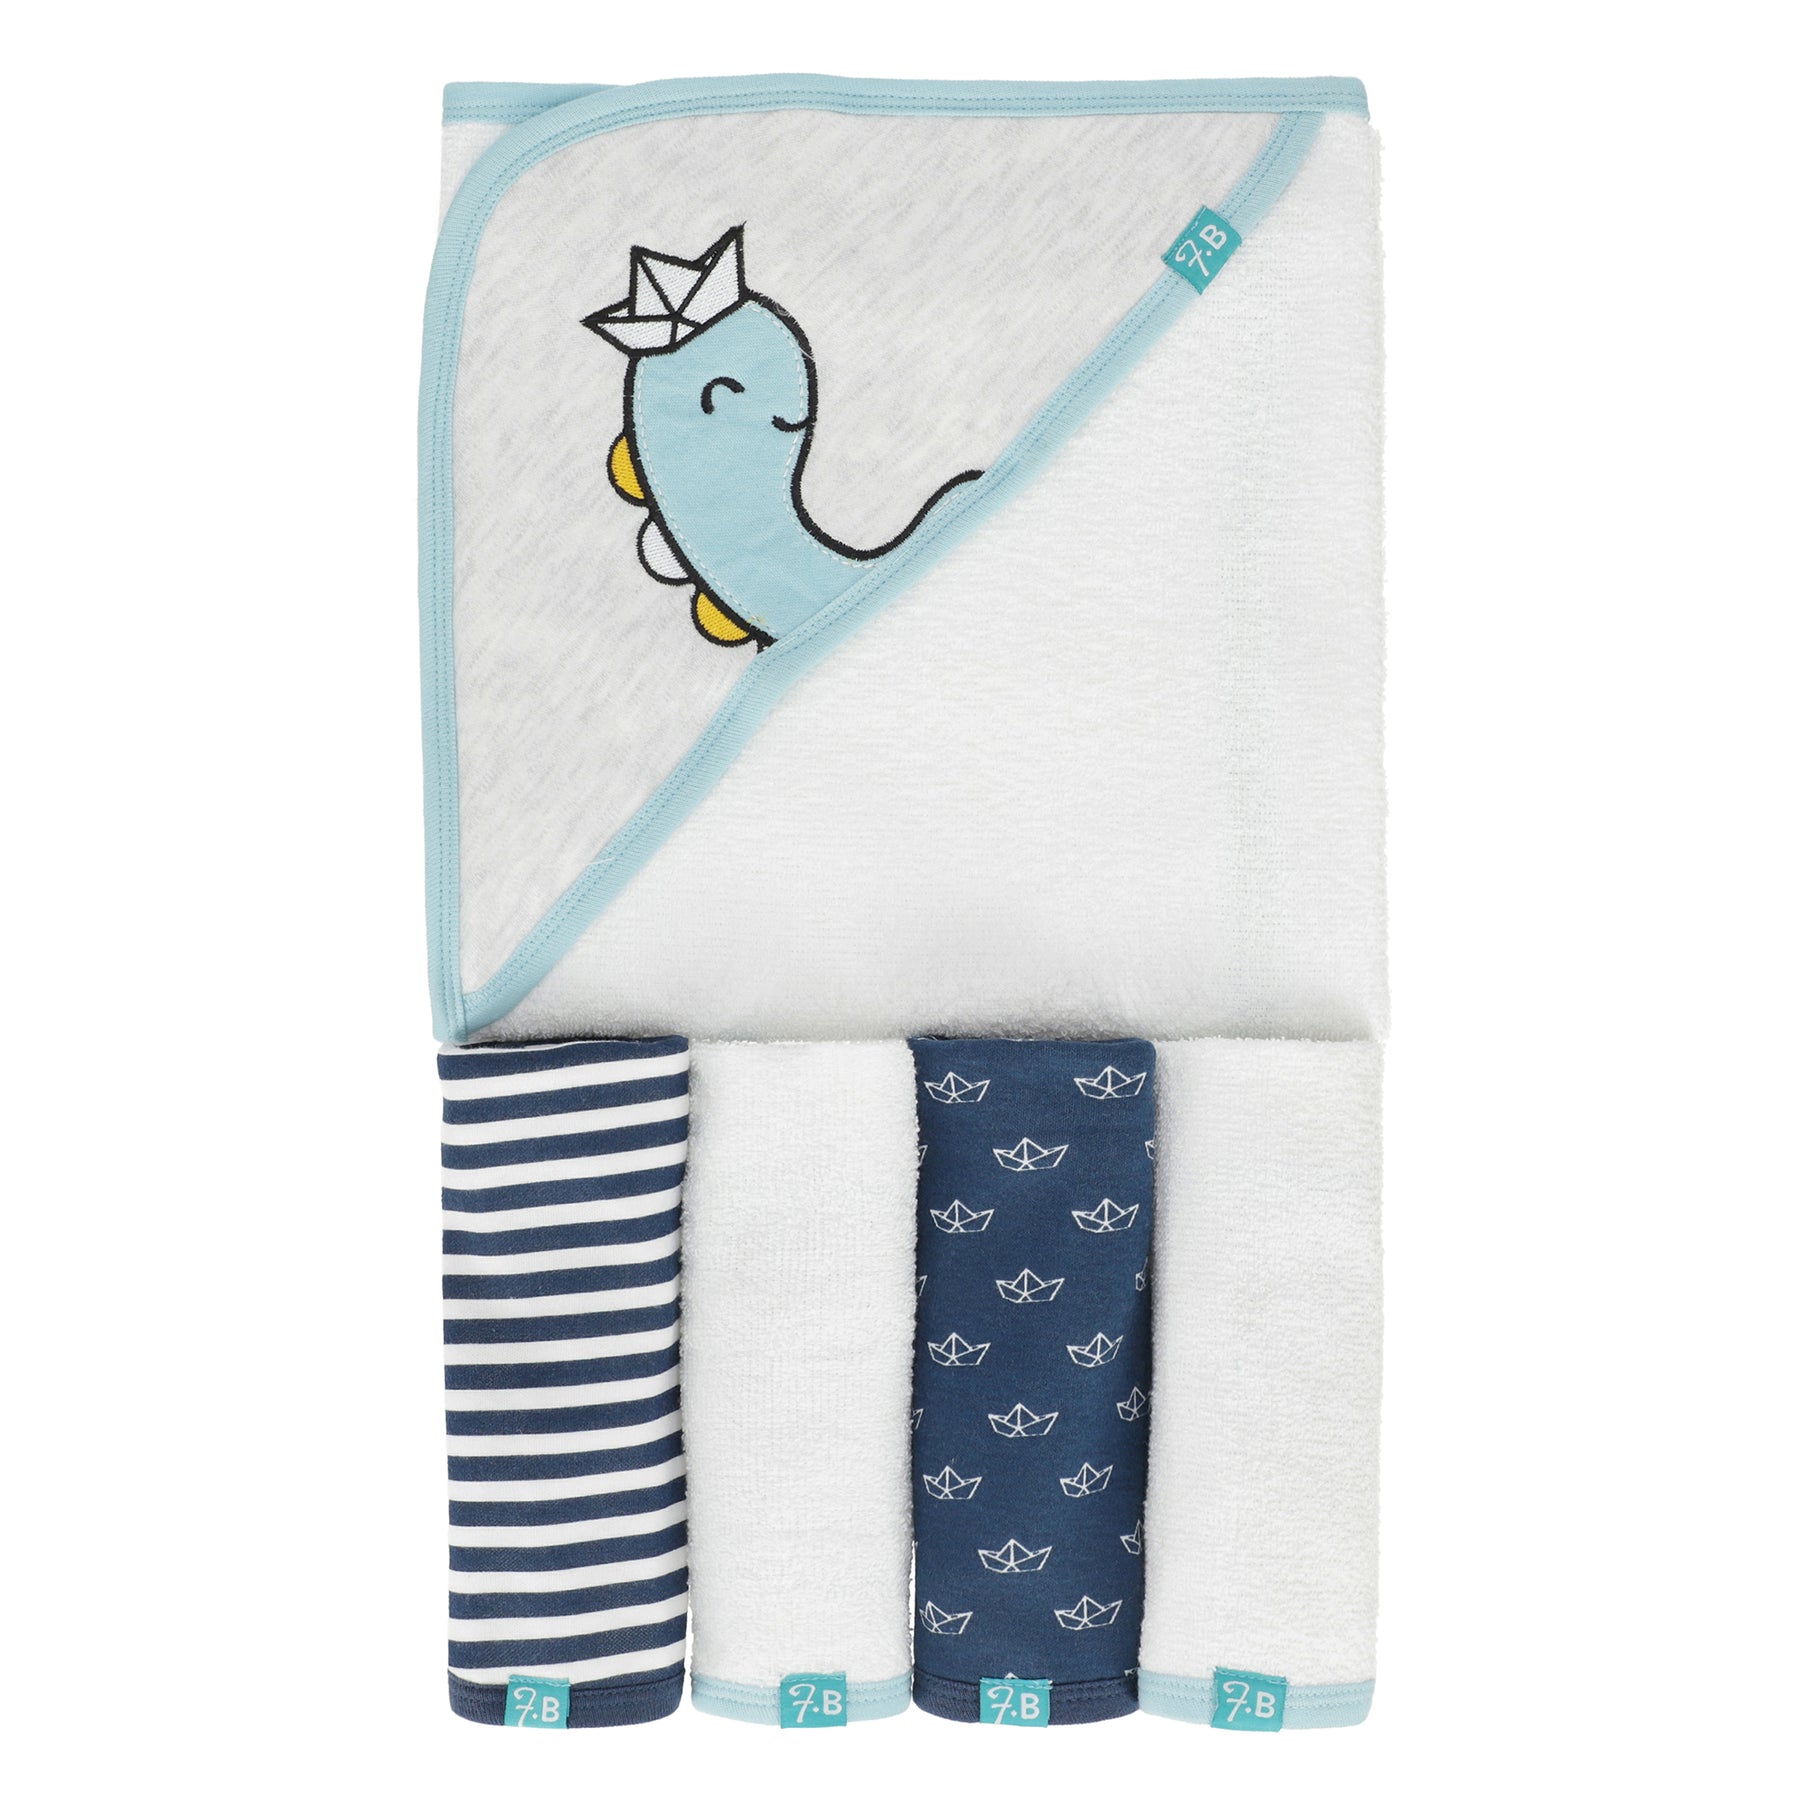 terry-hooded-towel-wash-cloth-111146